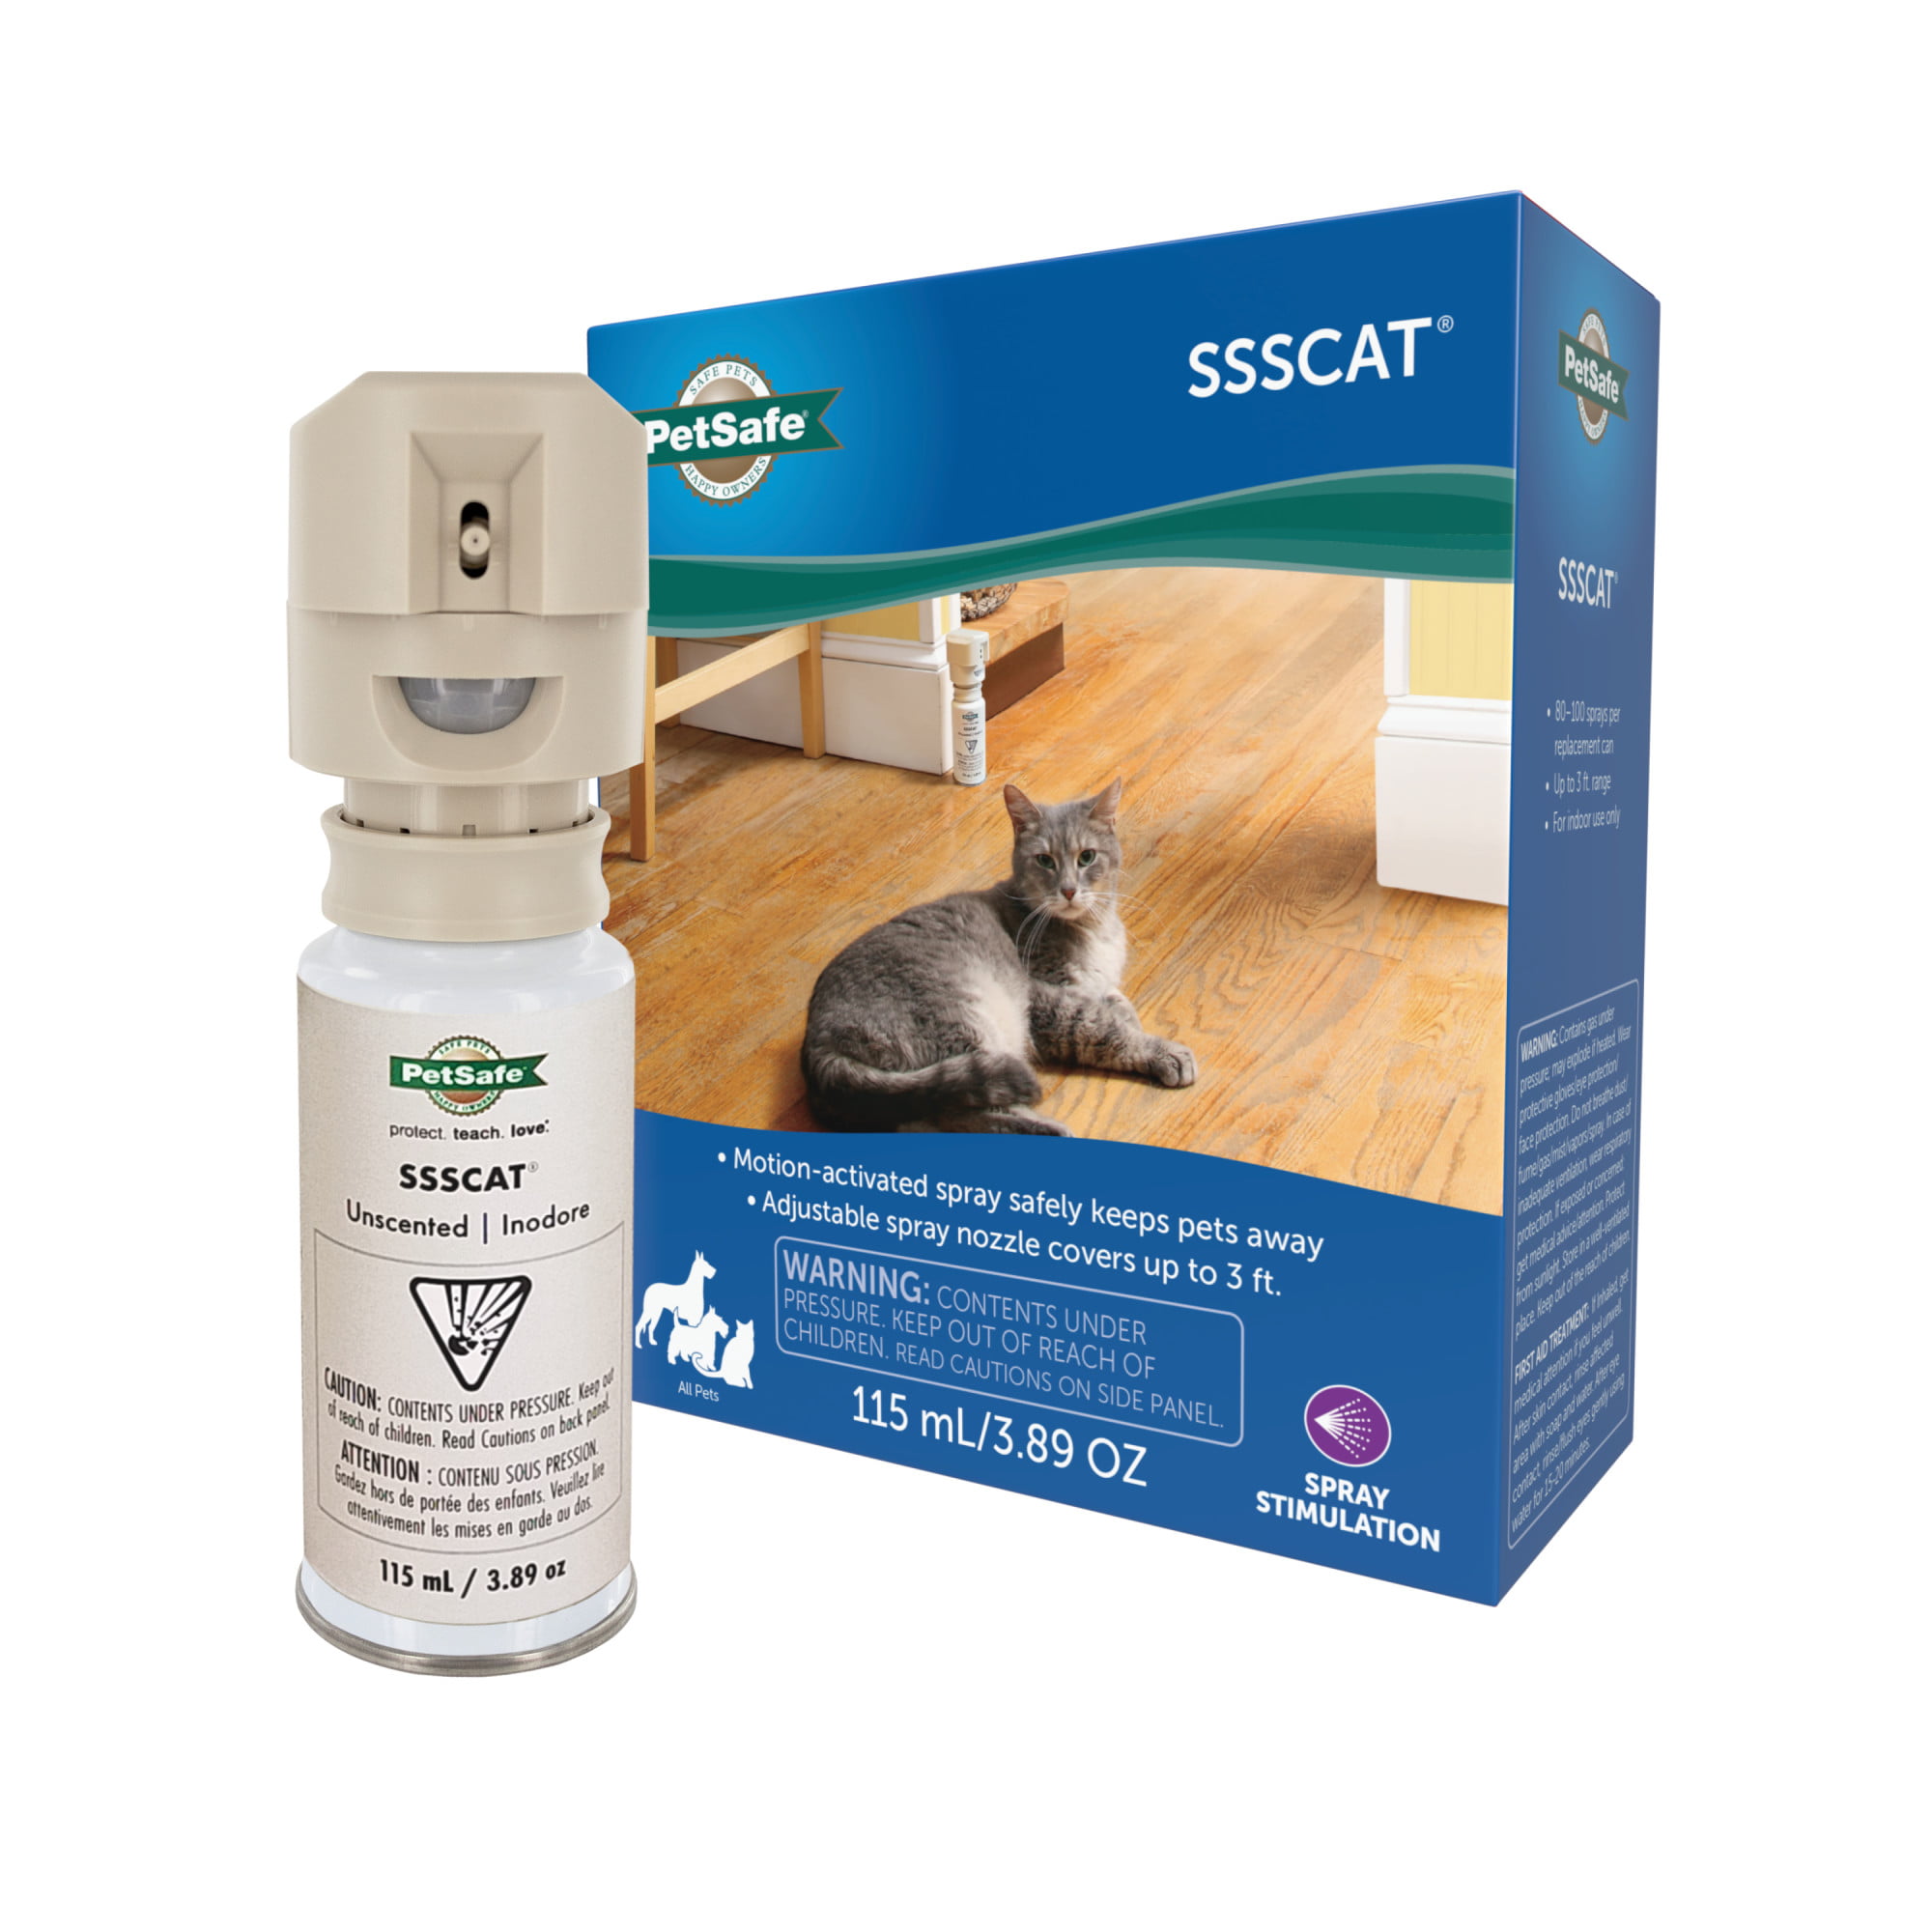 PetSafe SSSCAT Spray Pet Deterrent, Motion Activiated Pet Proofing Repellent for Cats and Dogs